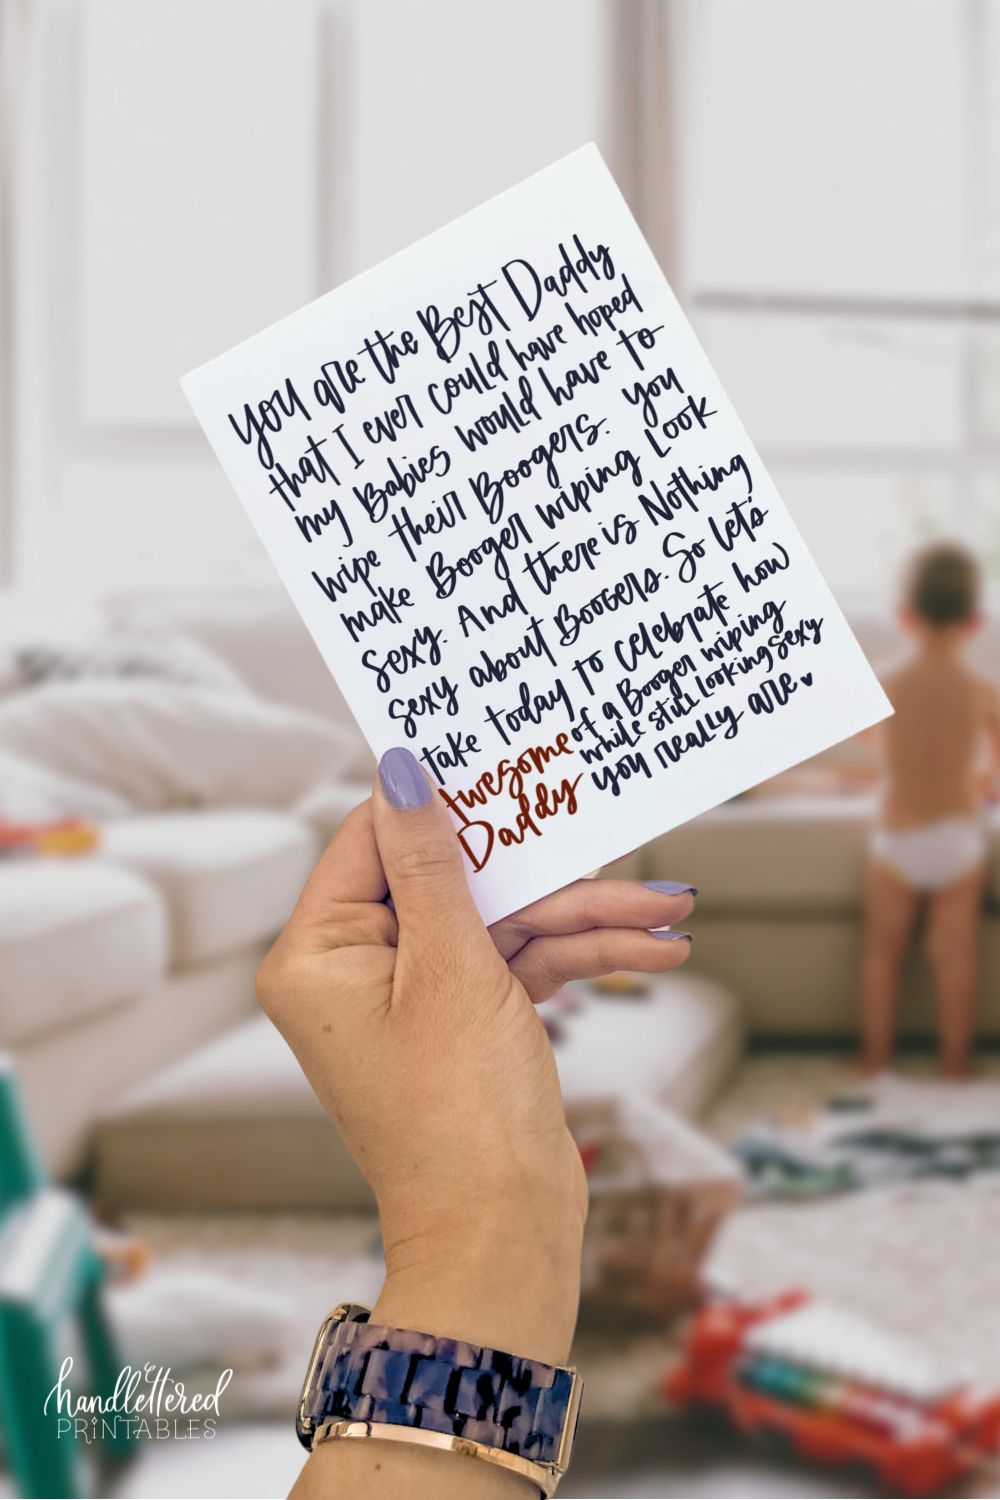 image of funny fathers day card: woman's hand holding a card in a messy living room with baby in the background. card reads: you are the best daddy that I could ever have hoped my babies would have to wipe their boogers. You make booger wiping look sexy. And there is nothing sexy about boogers. So let's take today to celebrate how awesome of a booger wiping while still looking sexy you really are.